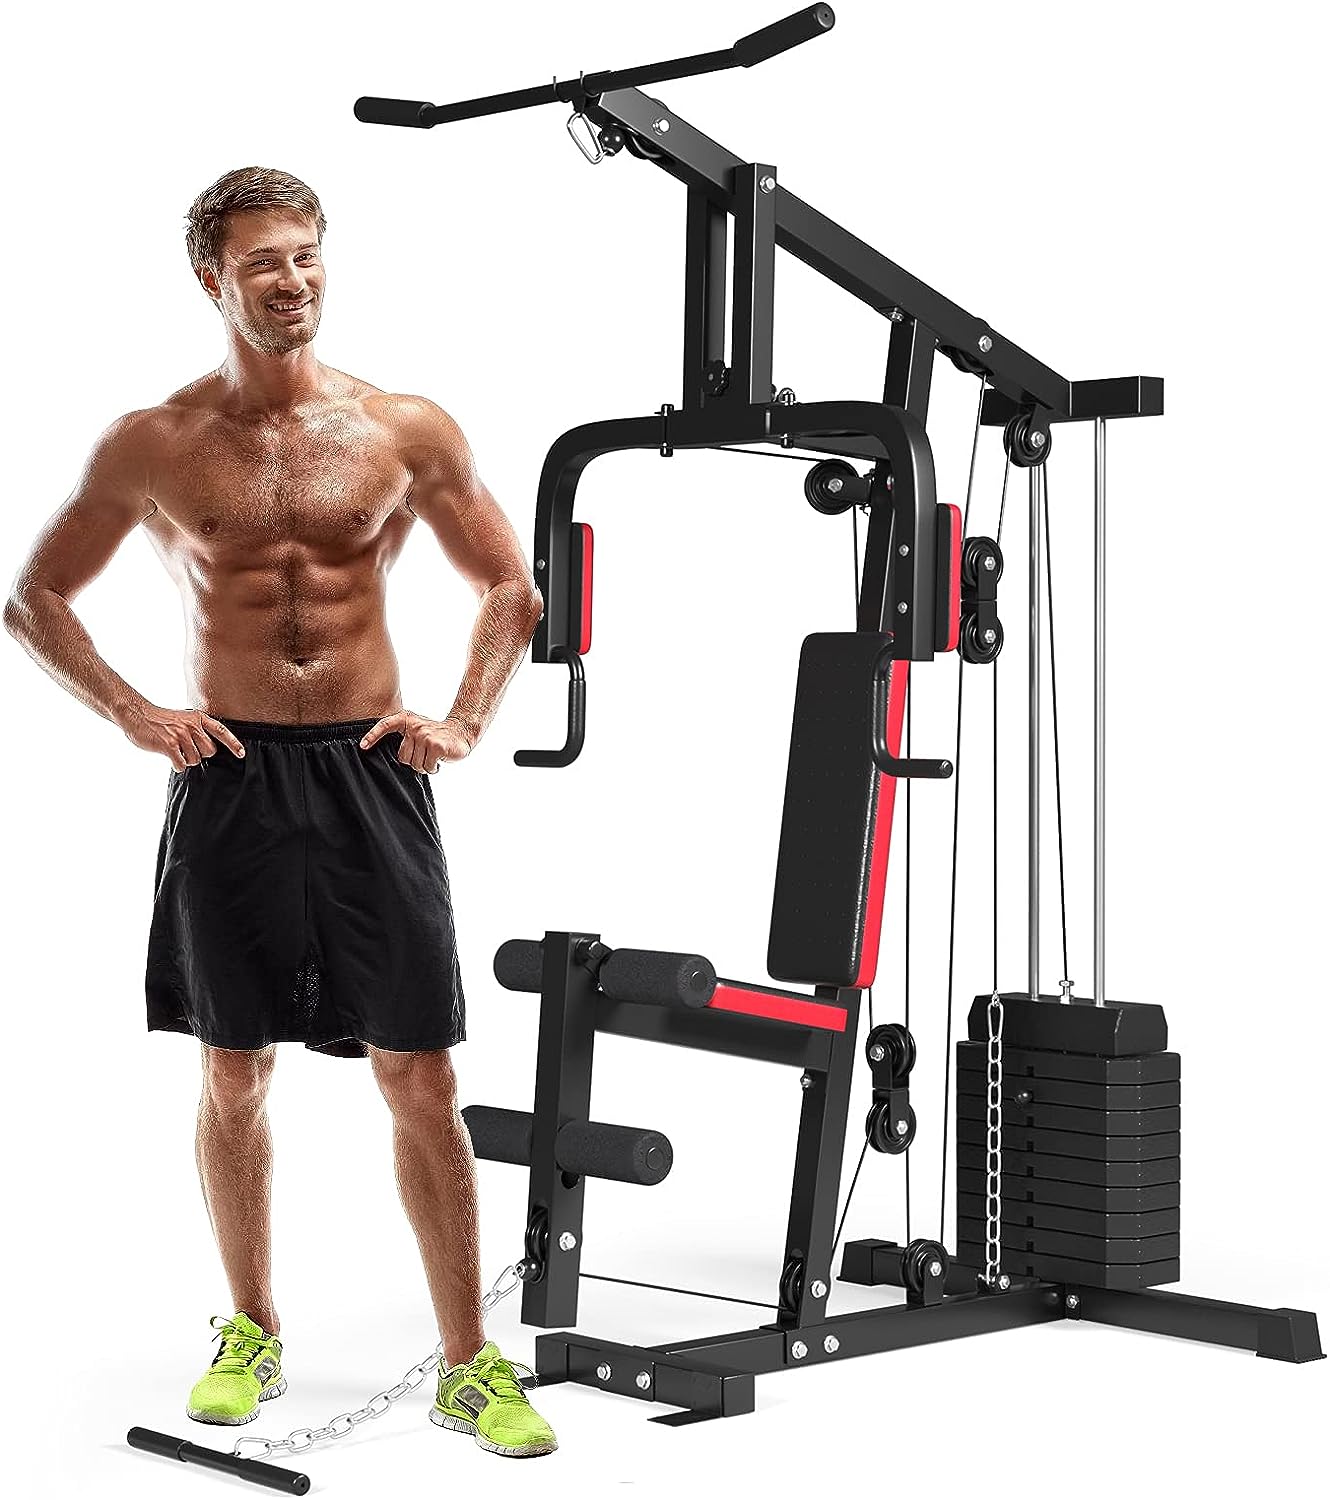 gymax weight training machine review